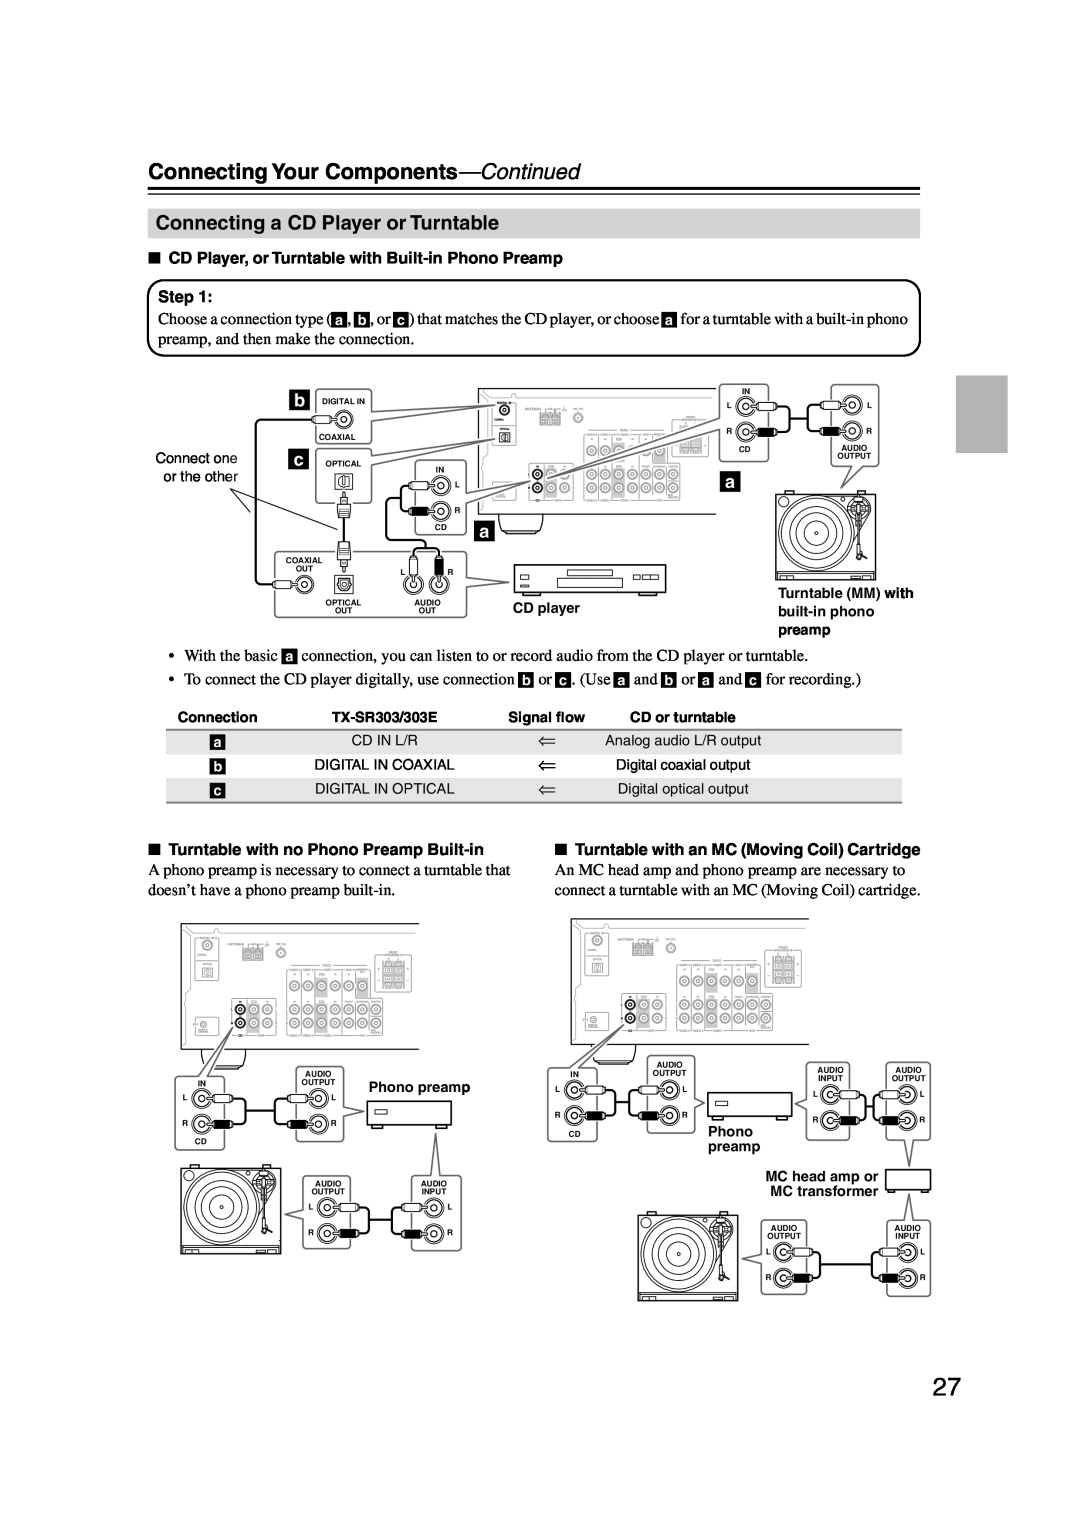 Onkyo TX-SR303E instruction manual Connecting a CD Player or Turntable, Connecting Your Components-Continued, Step 